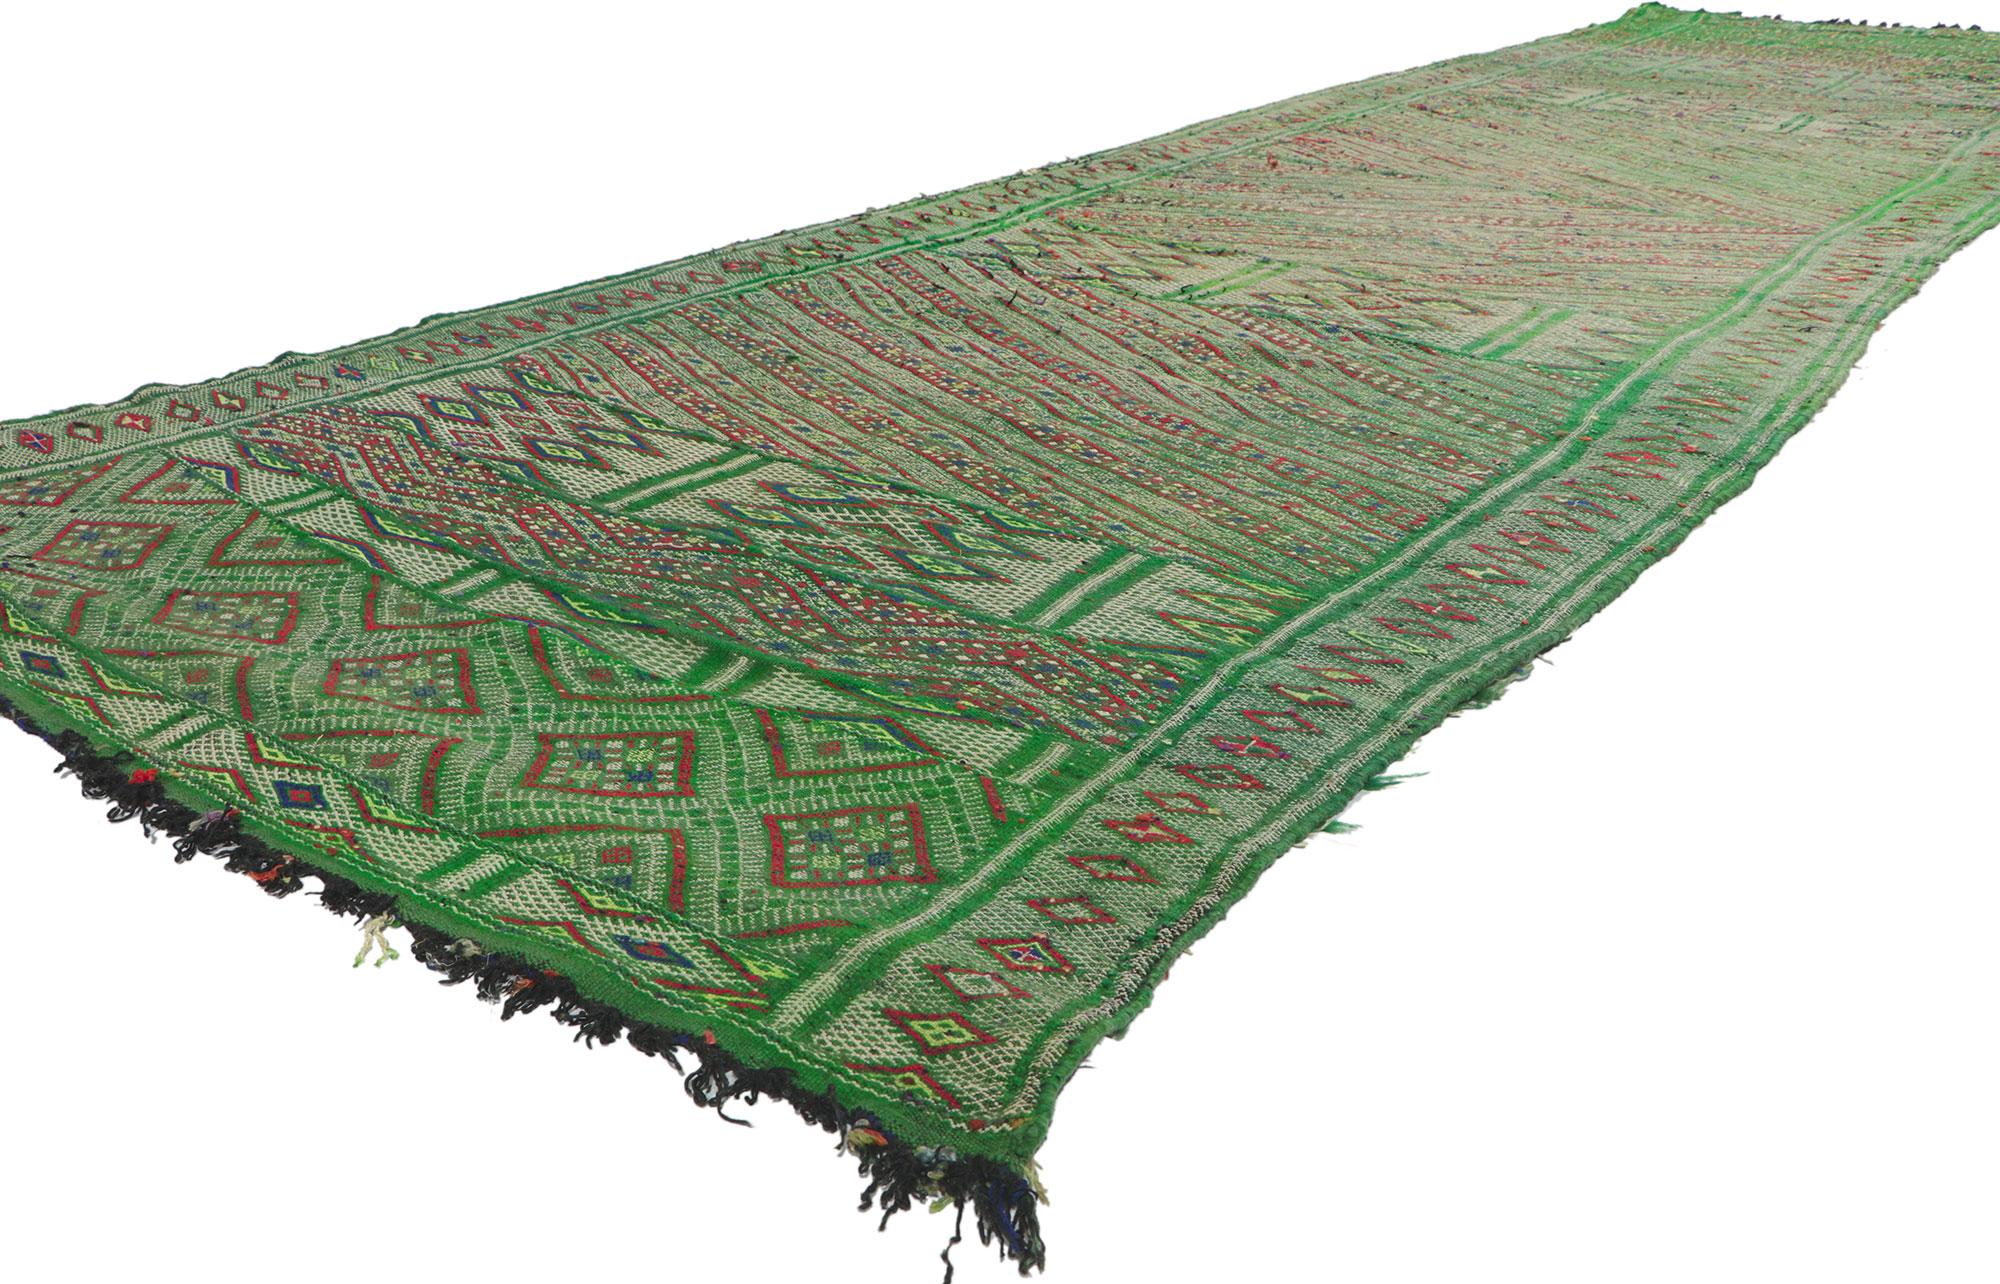 21701 Vintage Zemmour Moroccan Kilim Runner, 04'04 x 16'03. Full of tiny details and nomadic charm, this hand-woven wool vintage Zemmour Berber Moroccan kilim rug runner is a captivating vision of woven beauty. The abrashed field features an allover